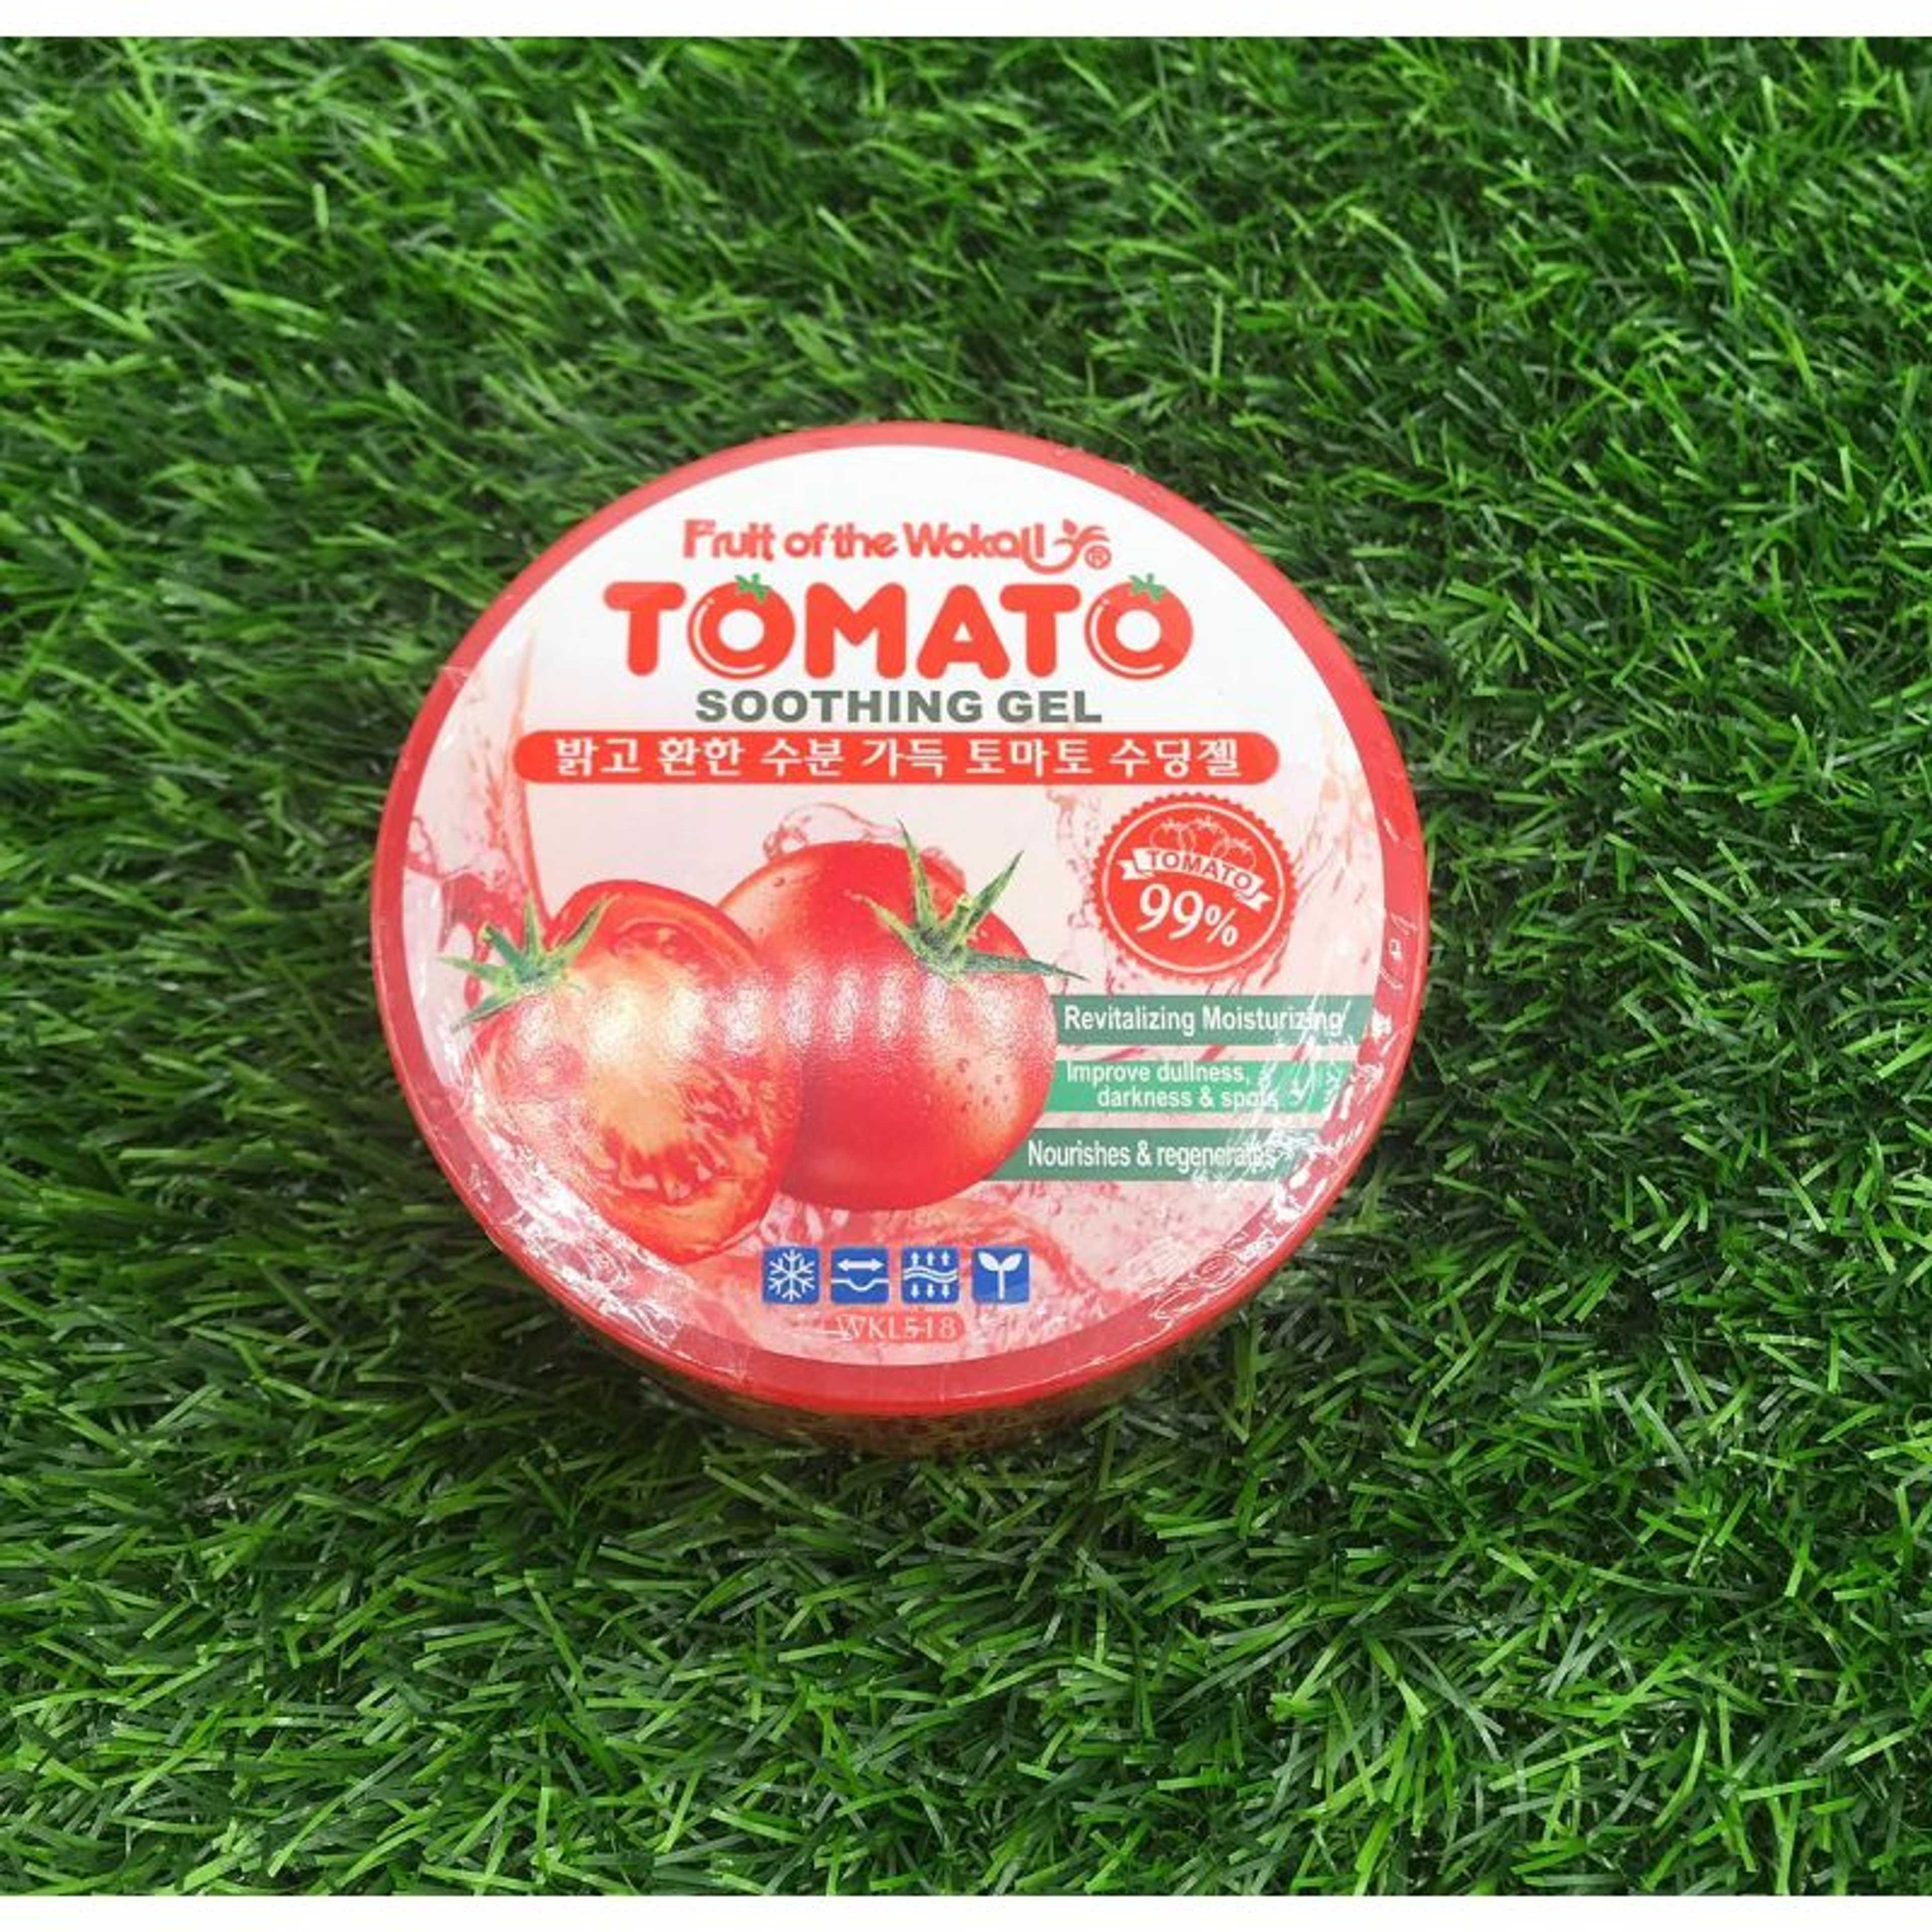 Tomato Soothing Gel